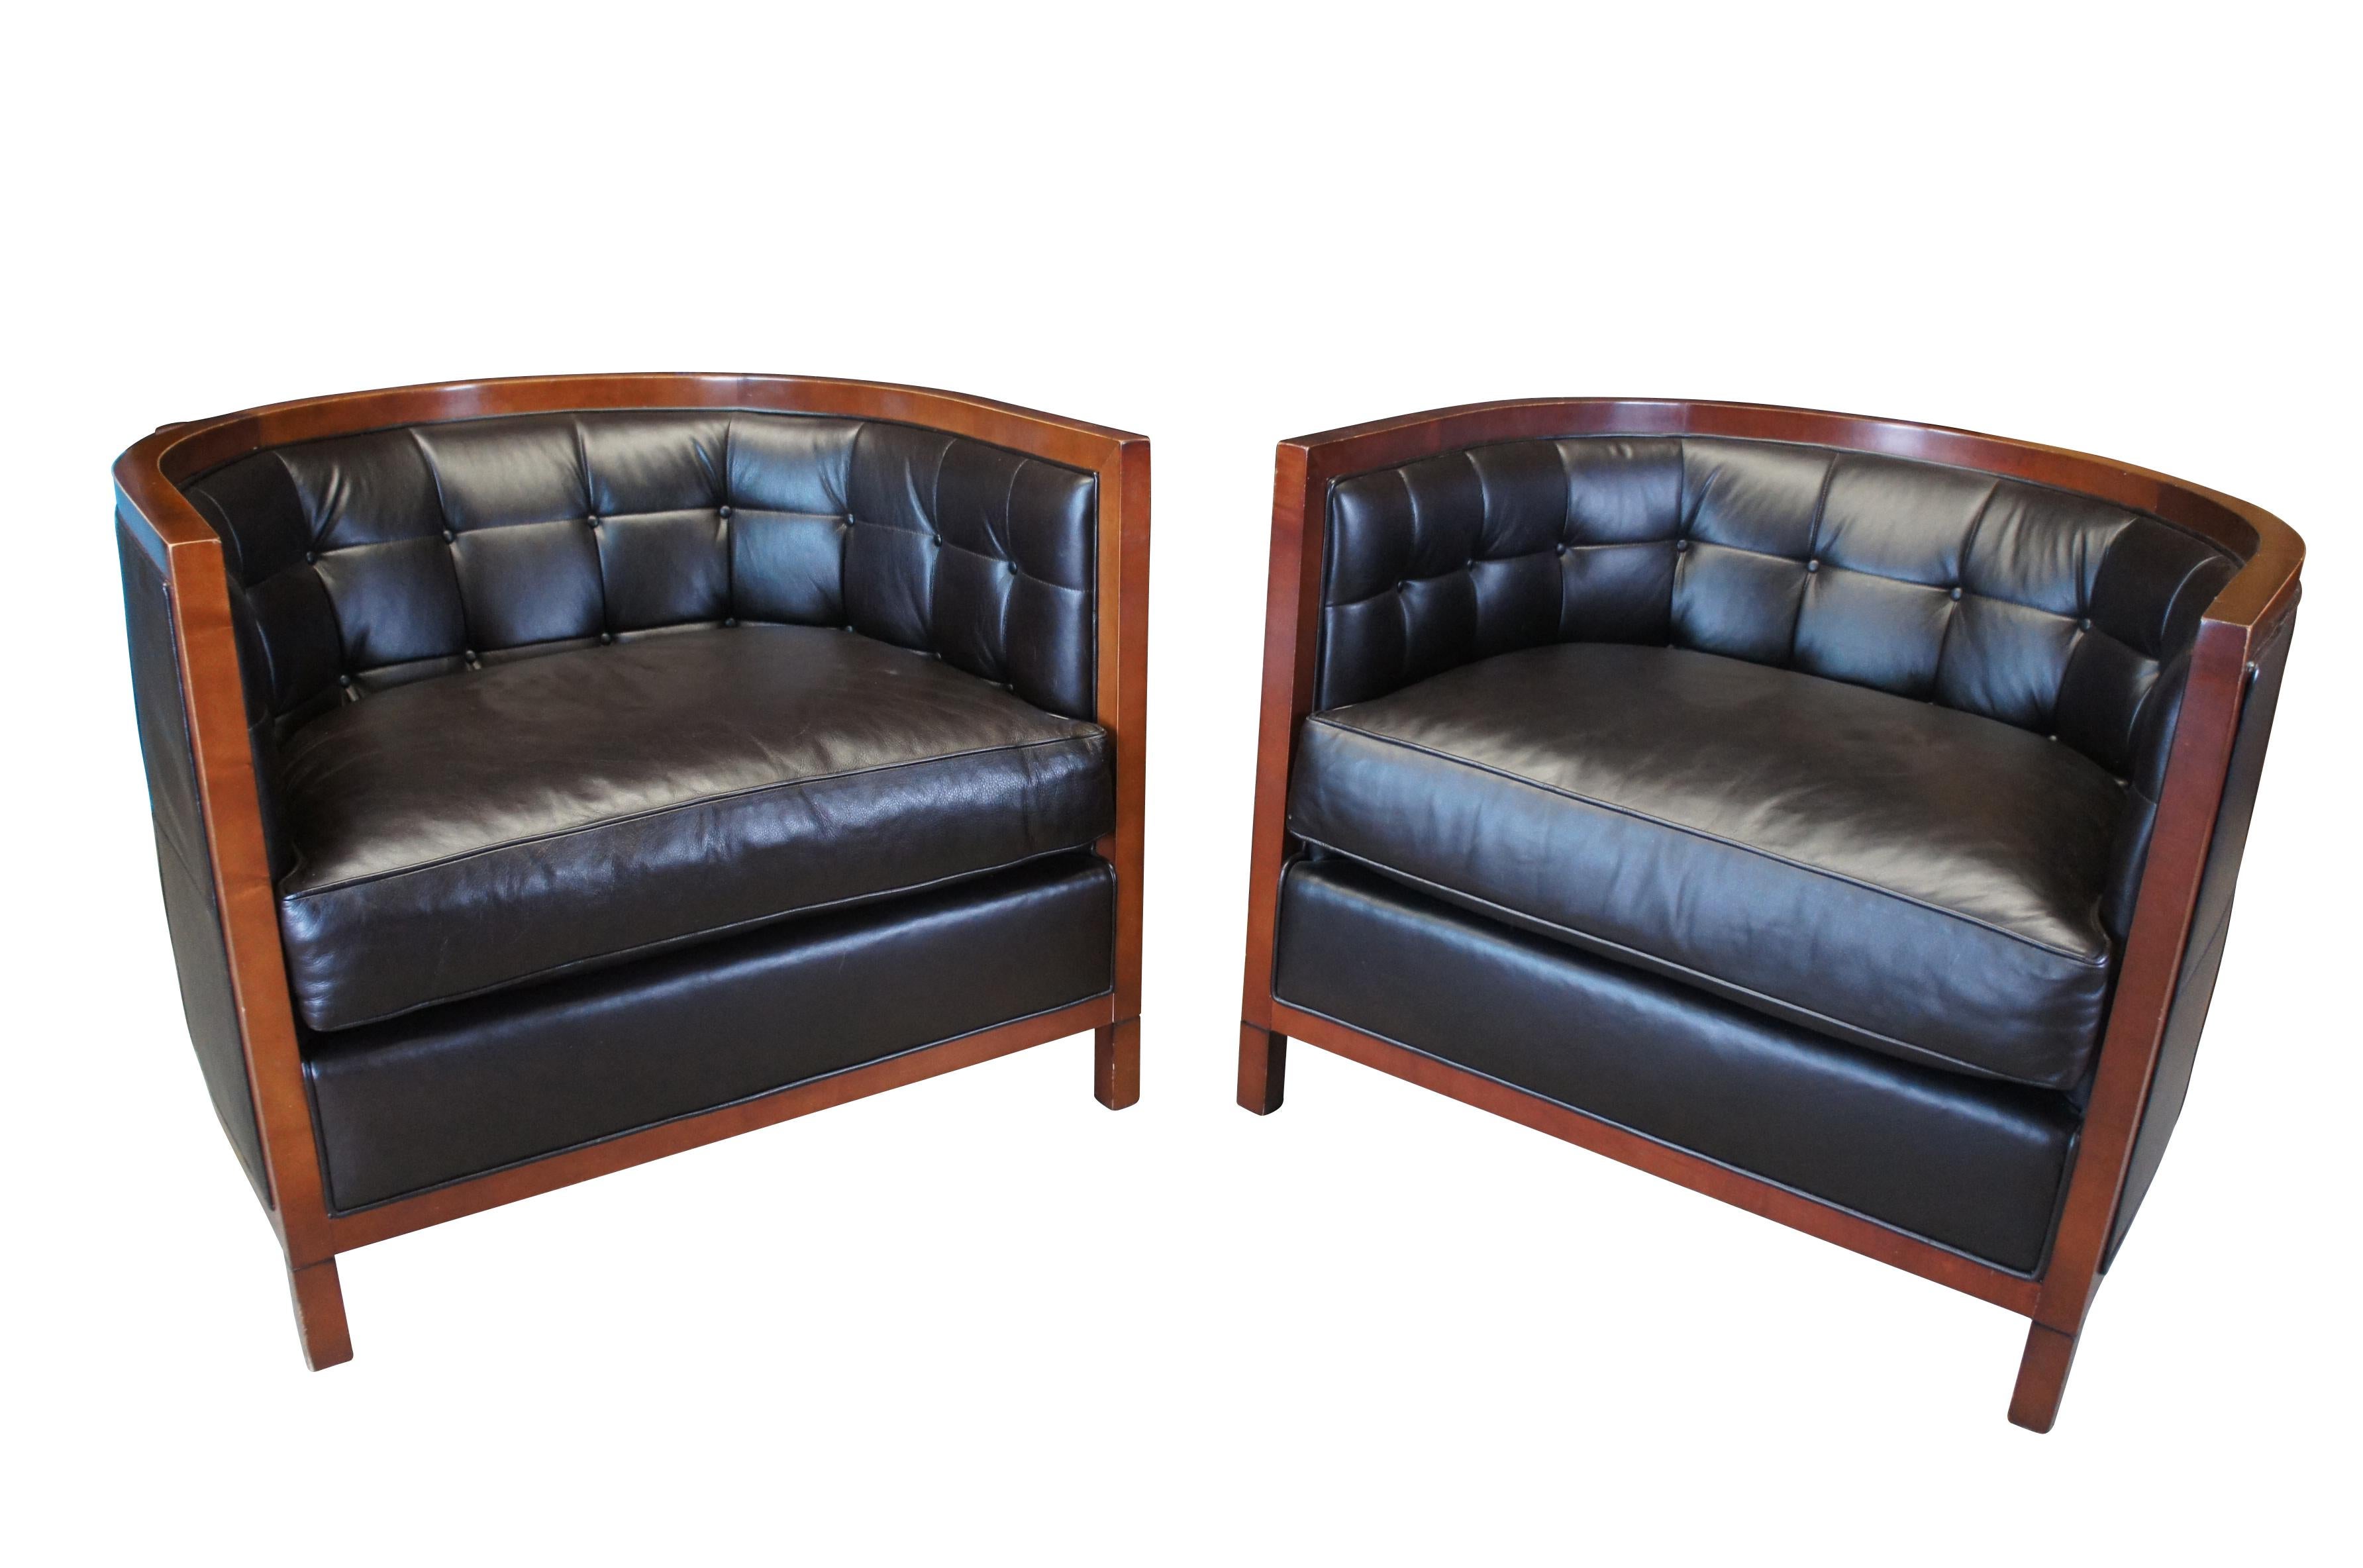 A gorgeous pair of library or club chairs by Baker Furniture.  The Archetype Round Tufted Club Chair features a plush leather seat and maple banded frame.  An updated barrel back chair. Perfect for any contemporary or modern space.  The chair is